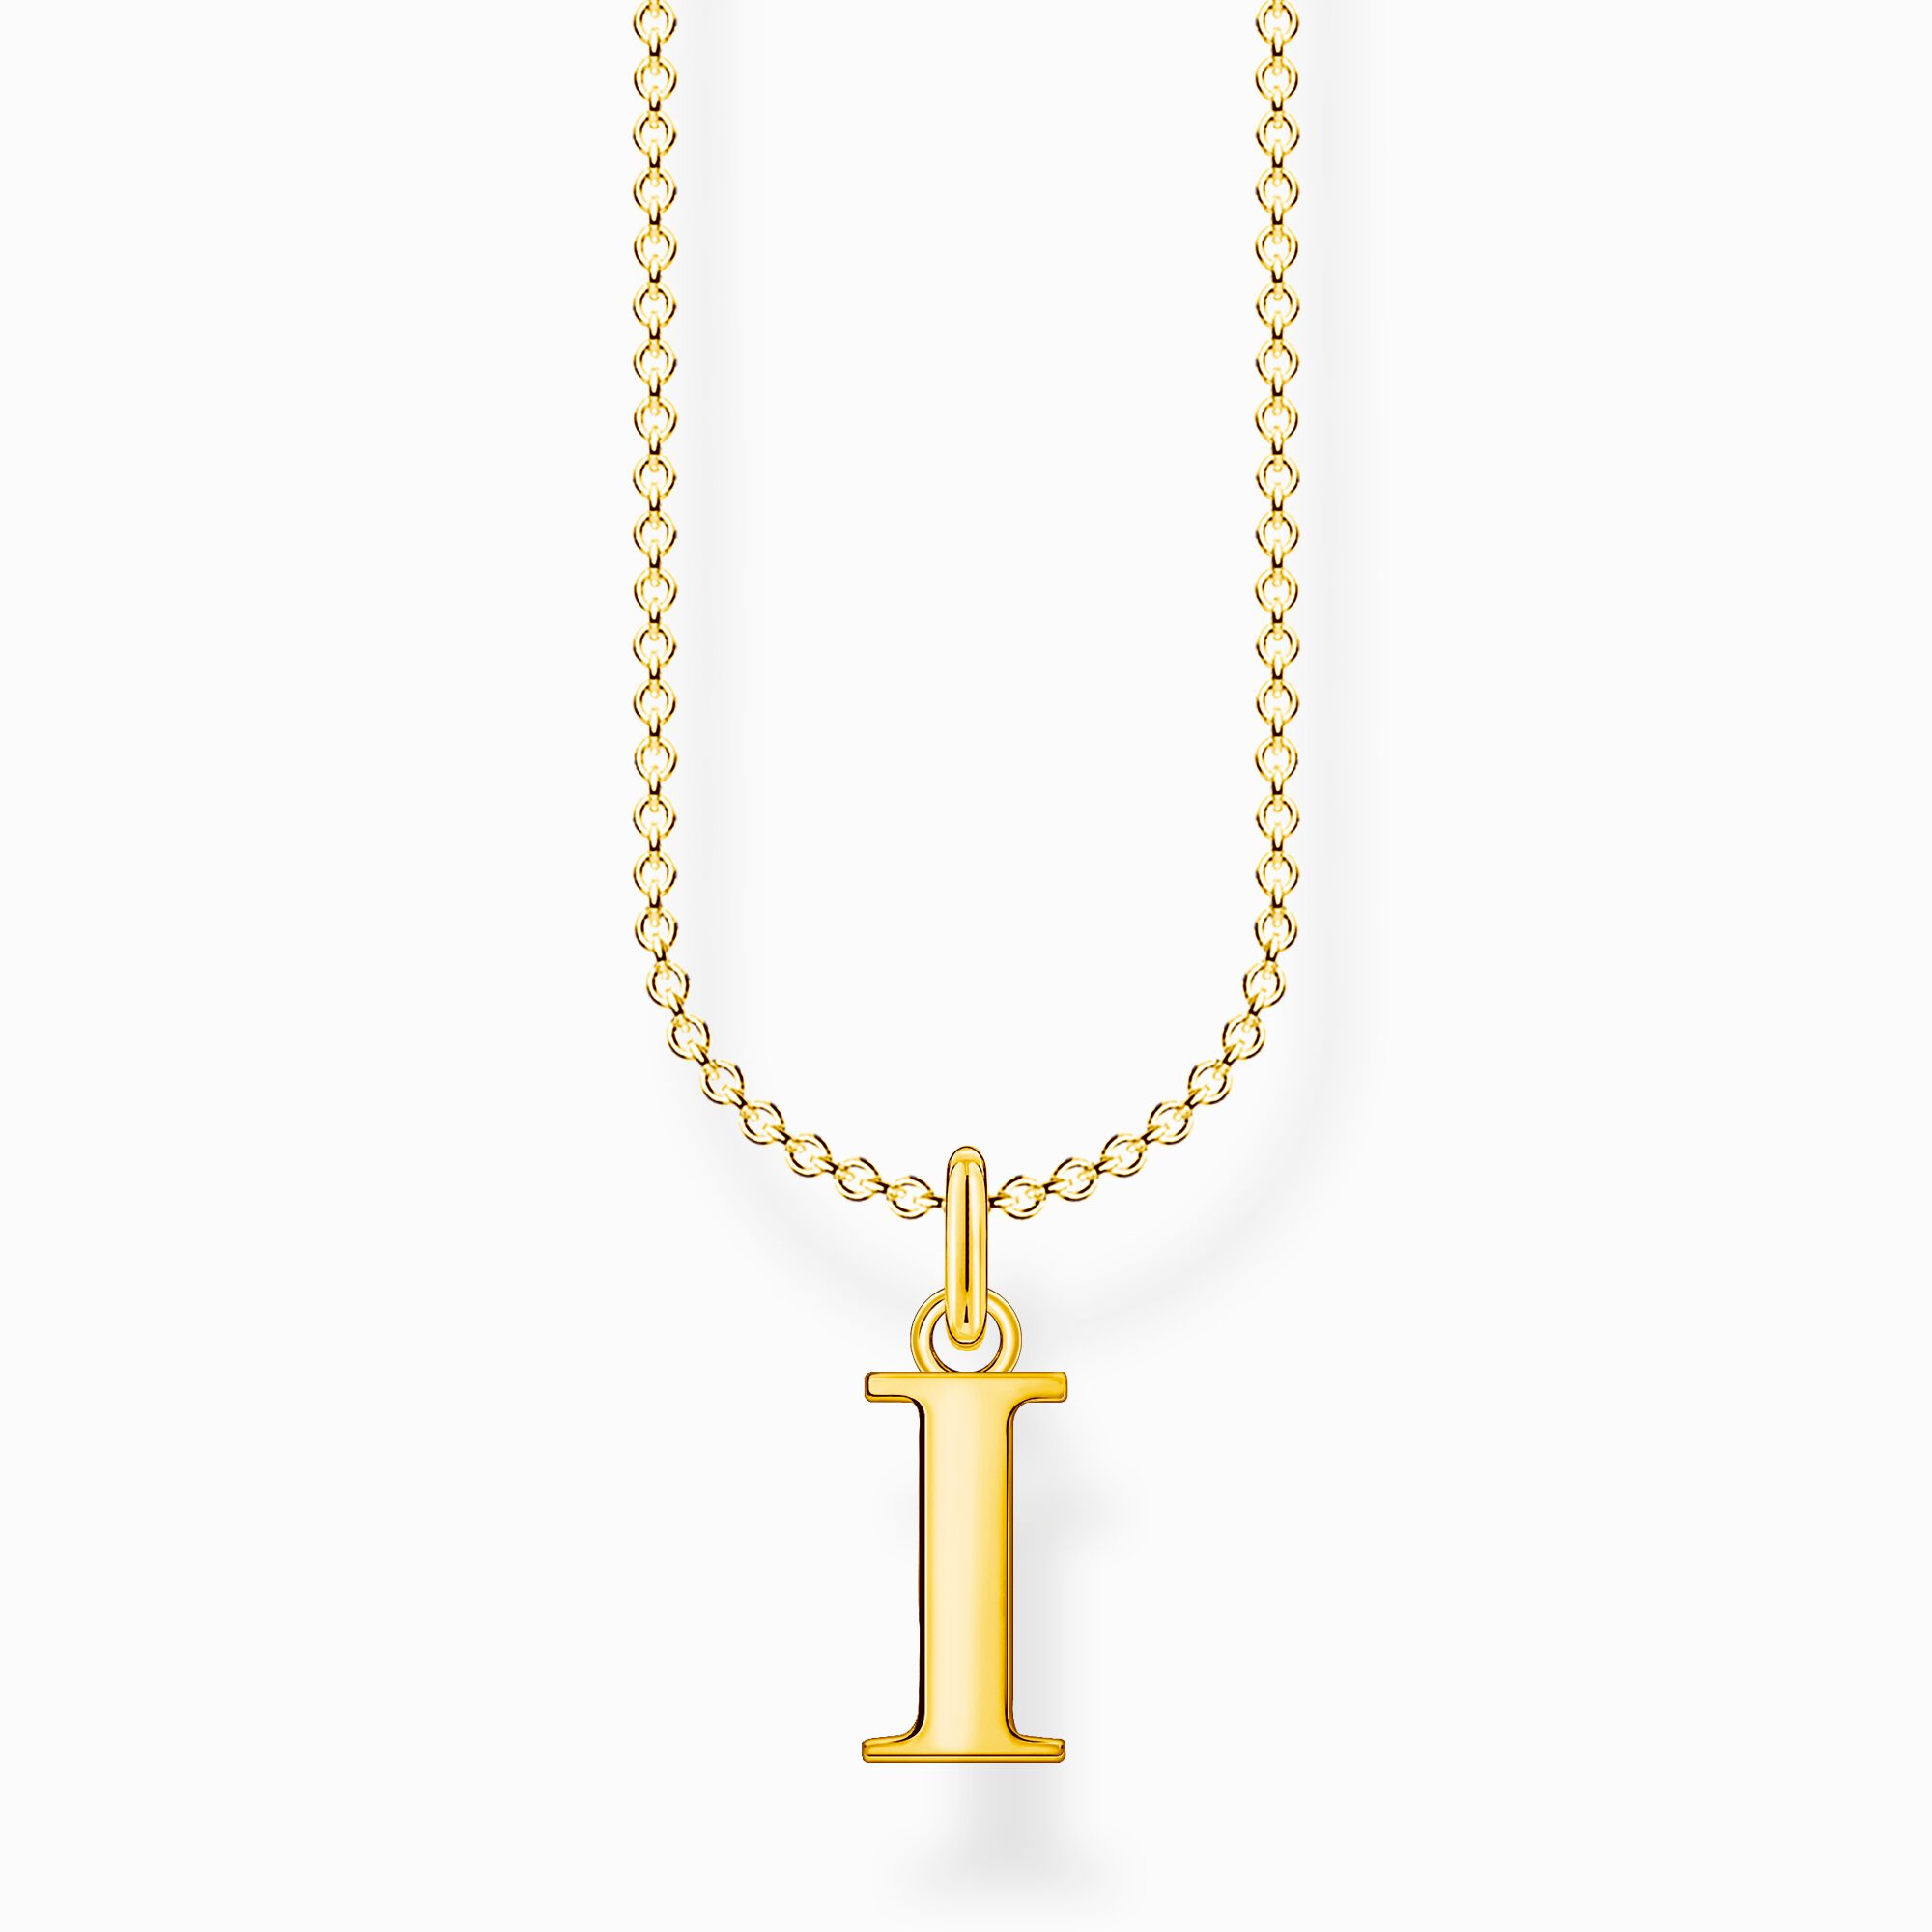 Necklace letter I gold from the Charming Collection collection in the THOMAS SABO online store